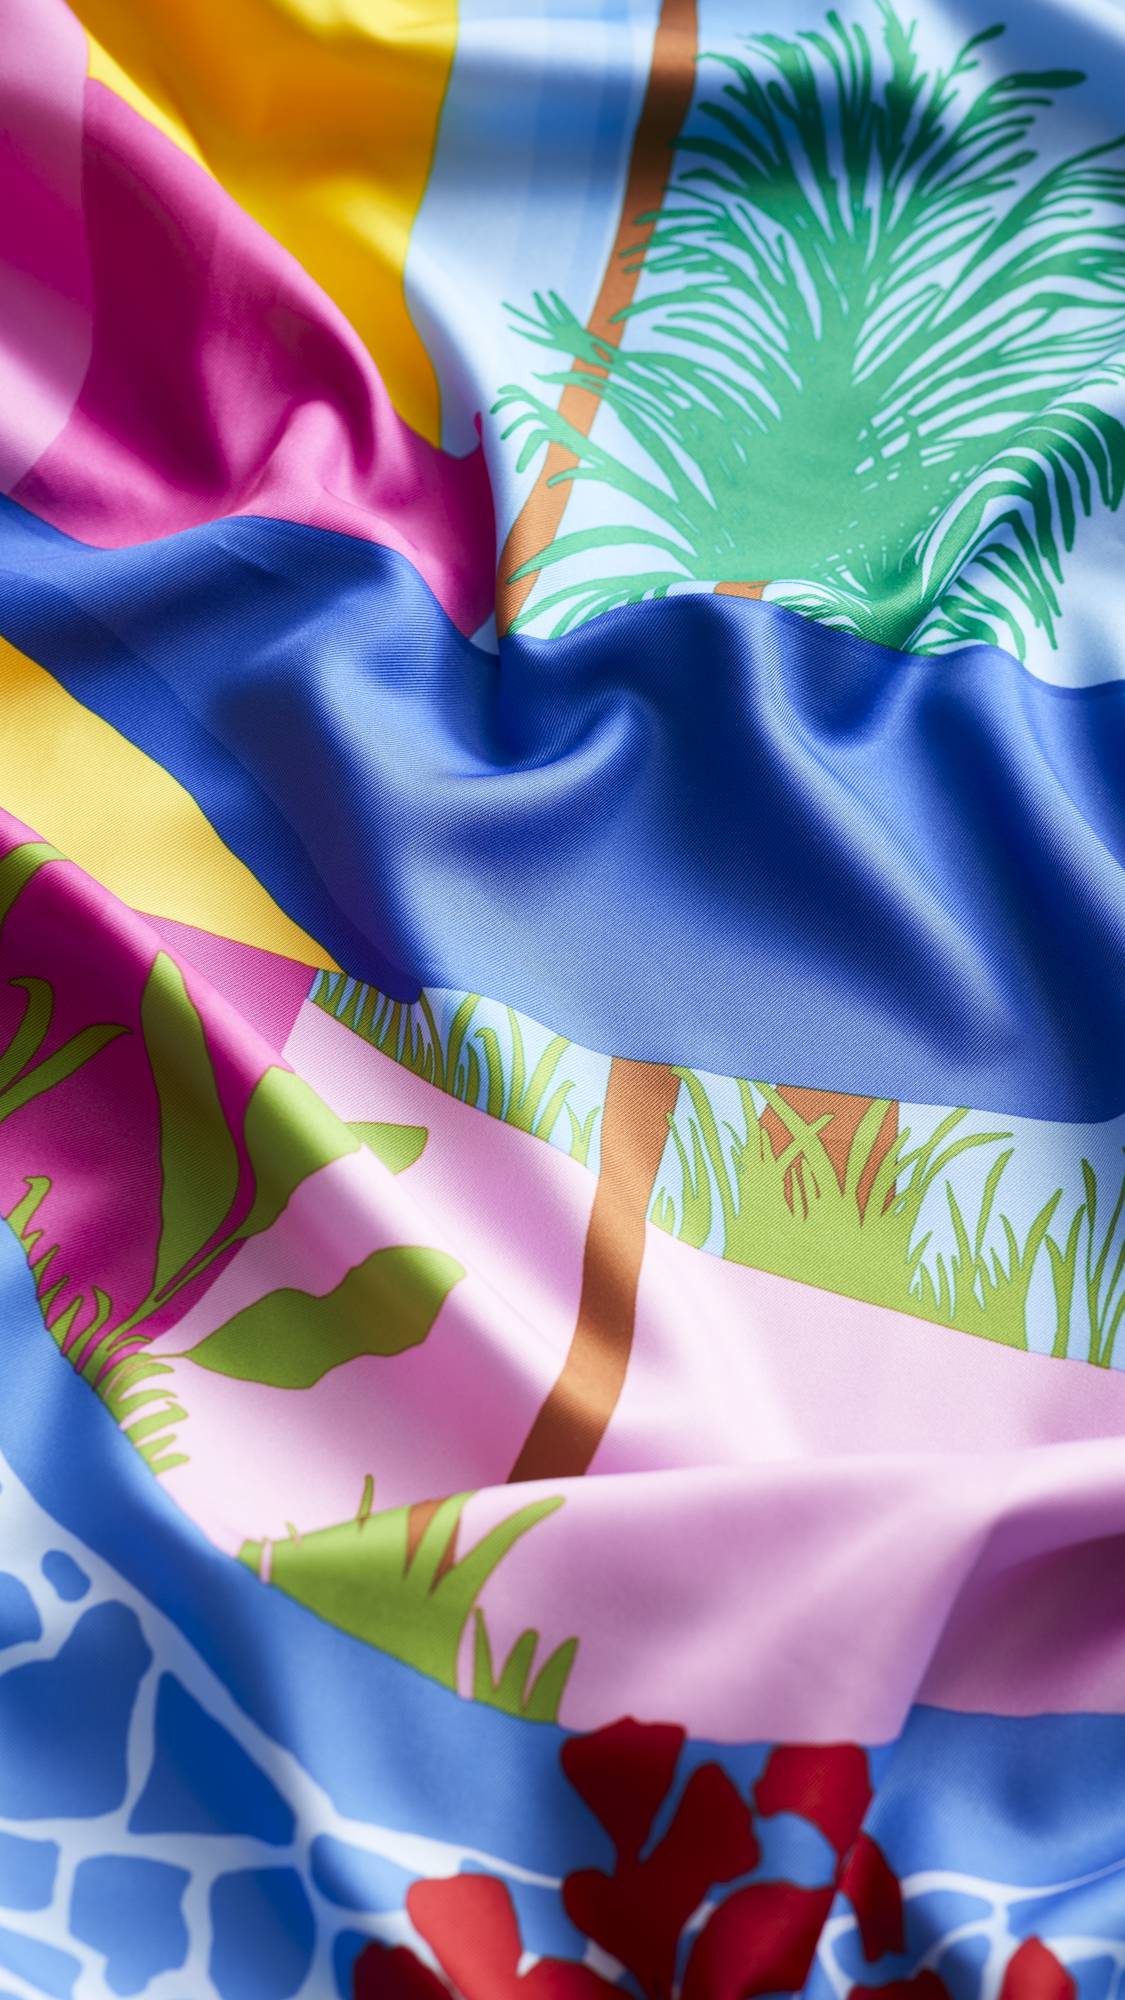 The image shows a close-up of the Summer Daydreams knot wrap focusing on the sheen of the fabric. 